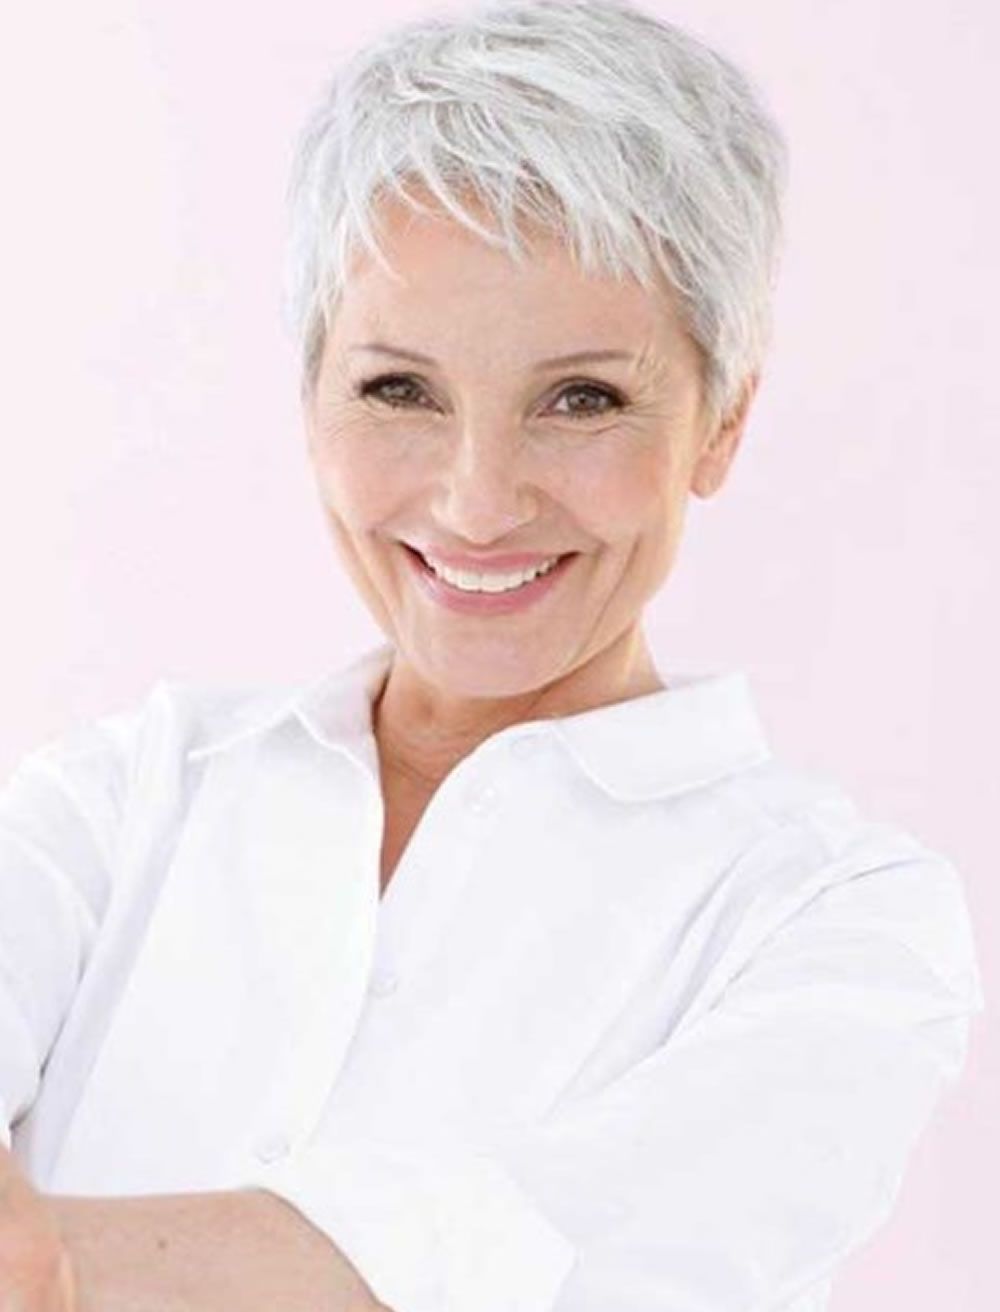 33 Top Pixie Hairstyles For Older Women | Short Pixie Haircuts For Regarding Most Popular Short Pixie Hairstyles For Women (View 2 of 15)